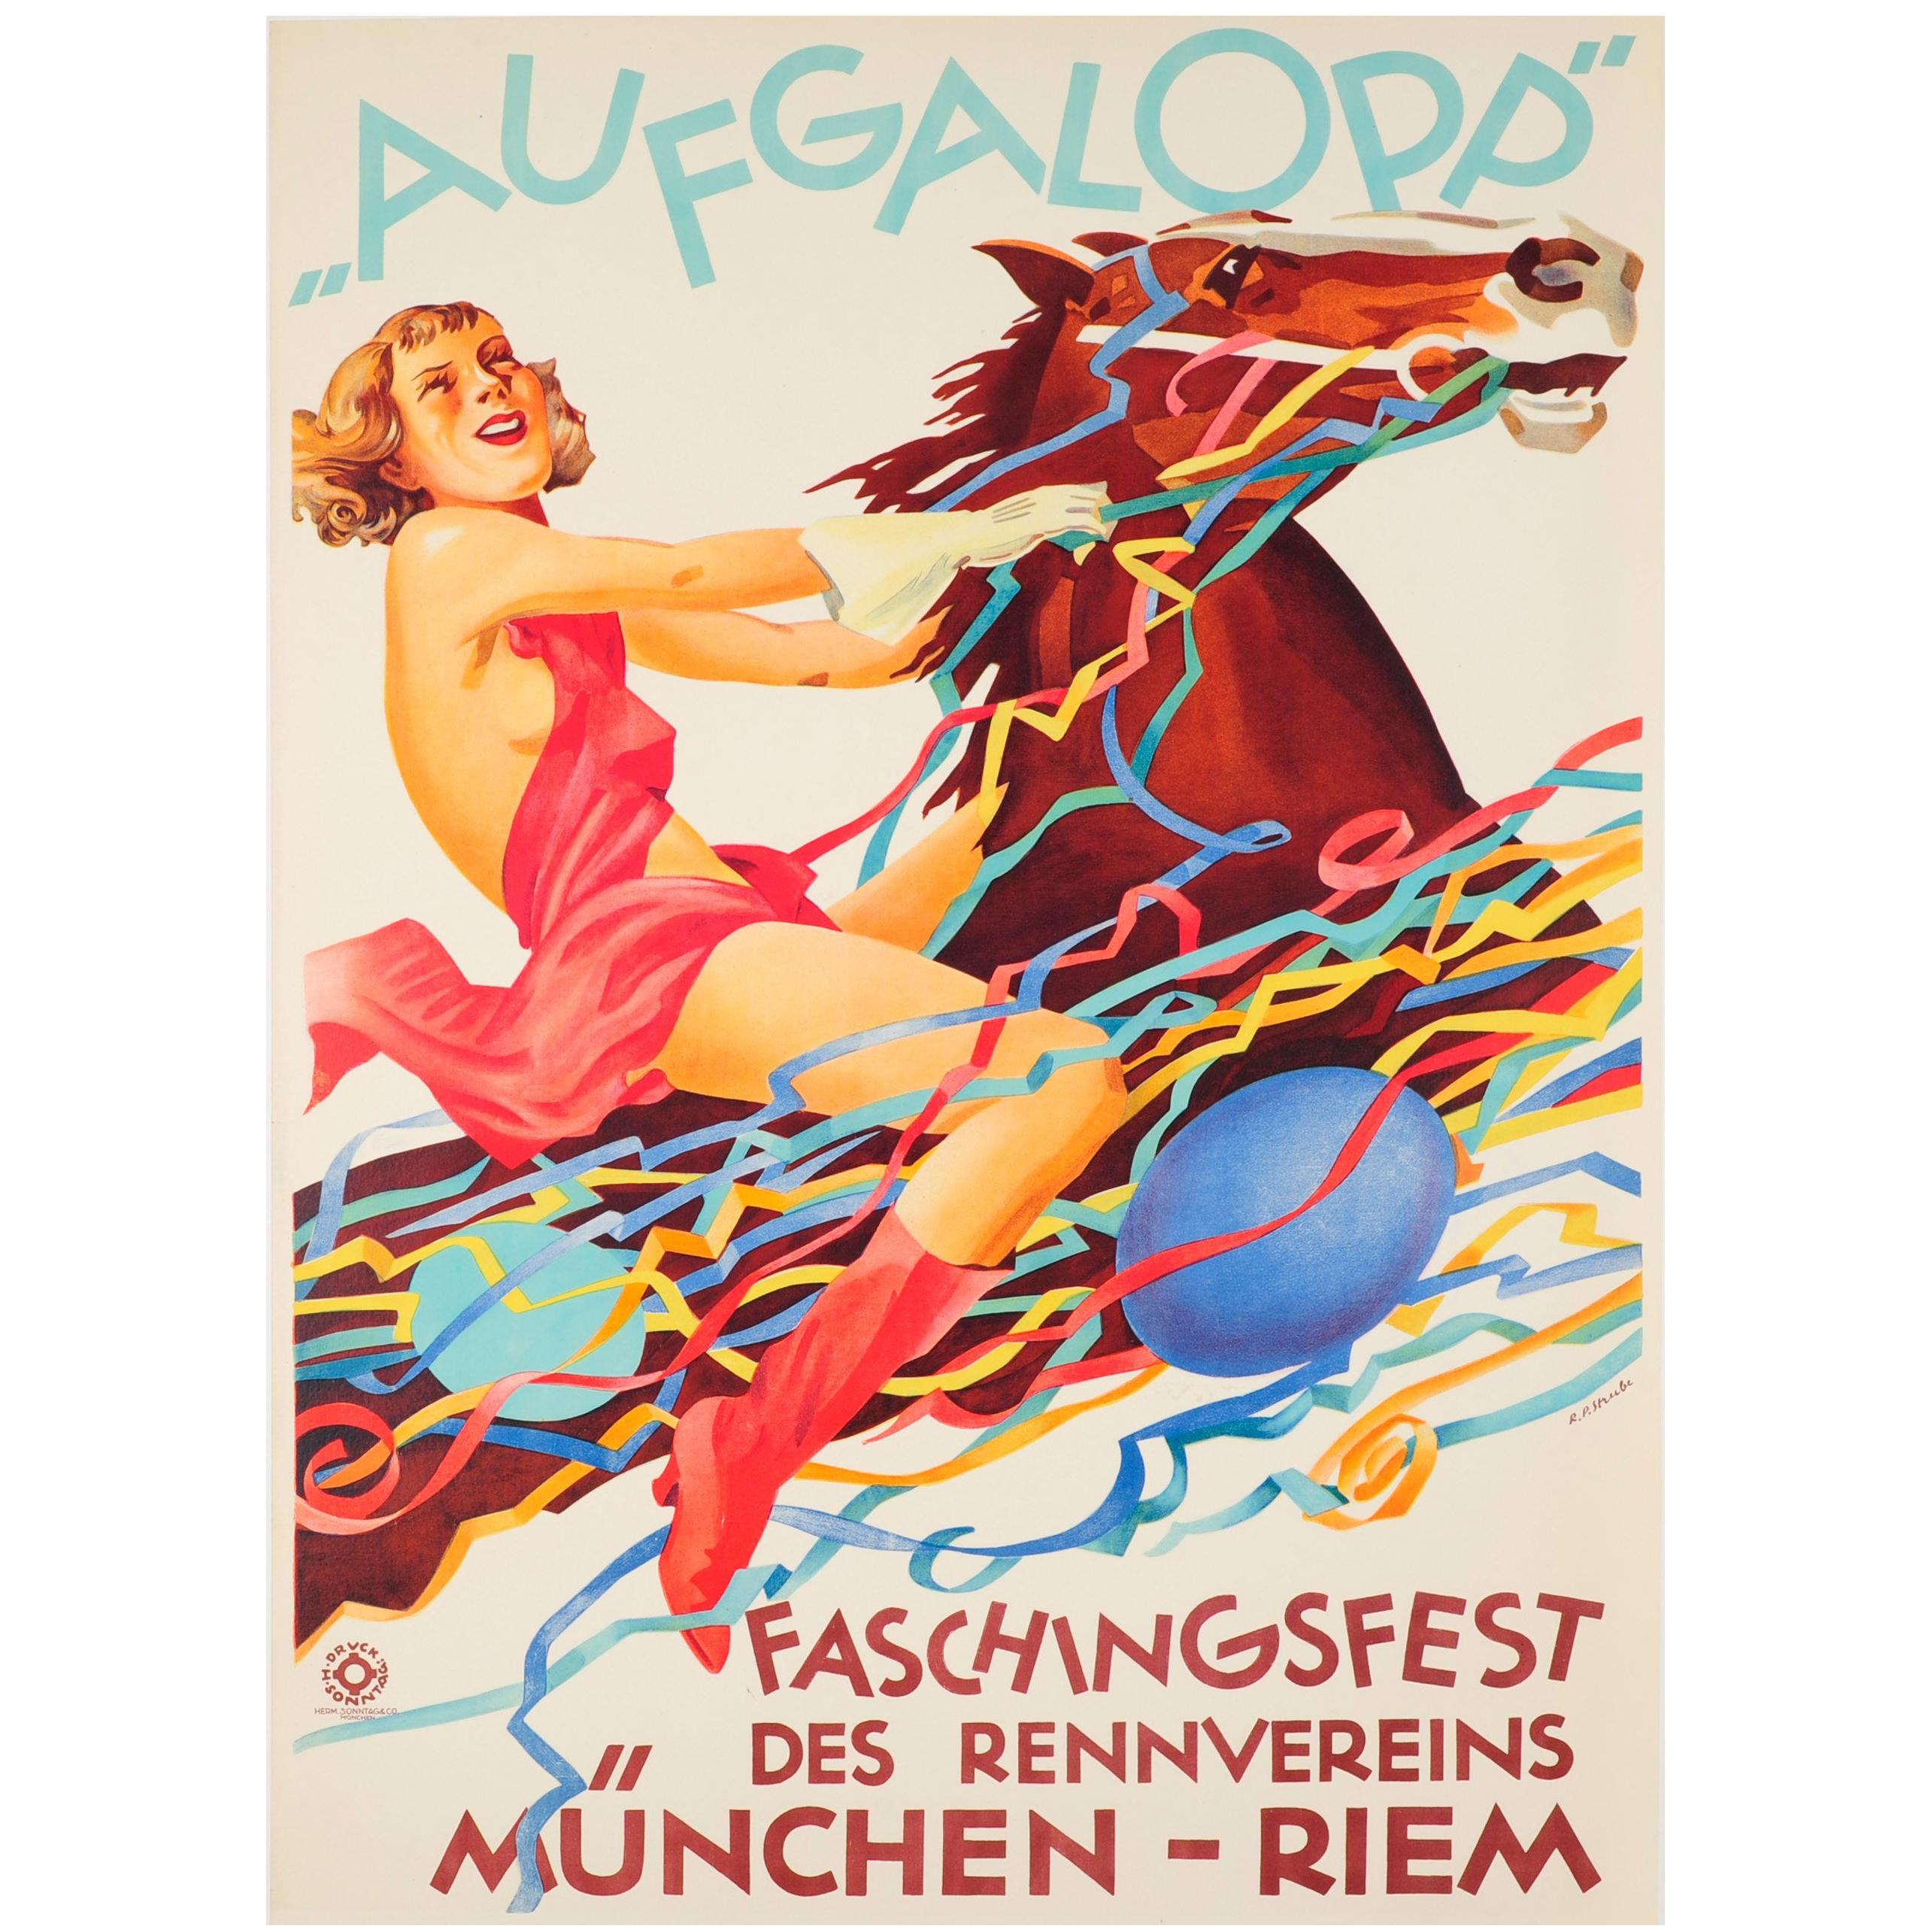 Original Vintage Poster for the Aufgalopp Faschingsfest Carnival Munich Ft Horse